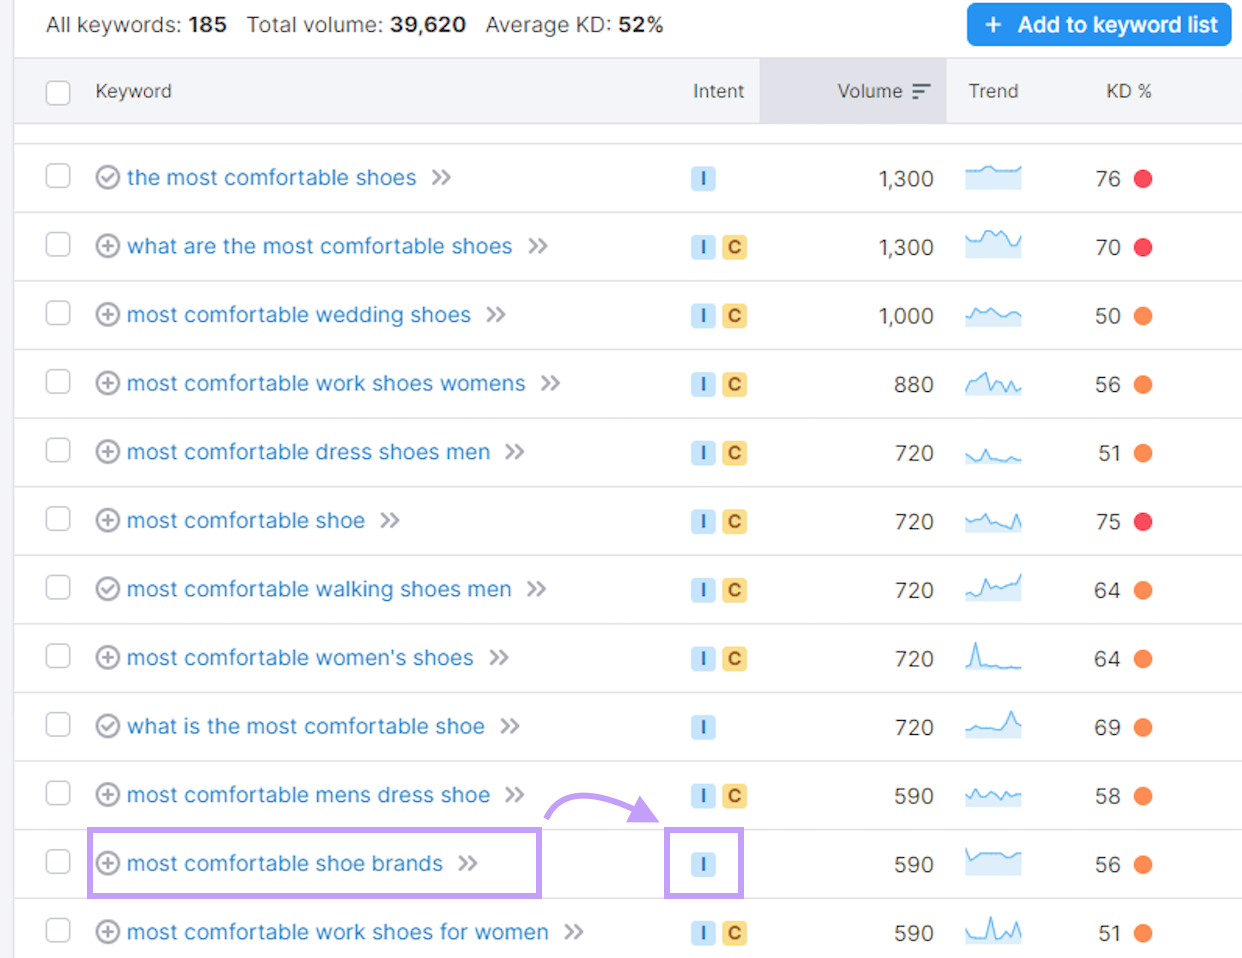 “most comfortable shoe brands” keyword shows informational intent in Keyword Magic tool